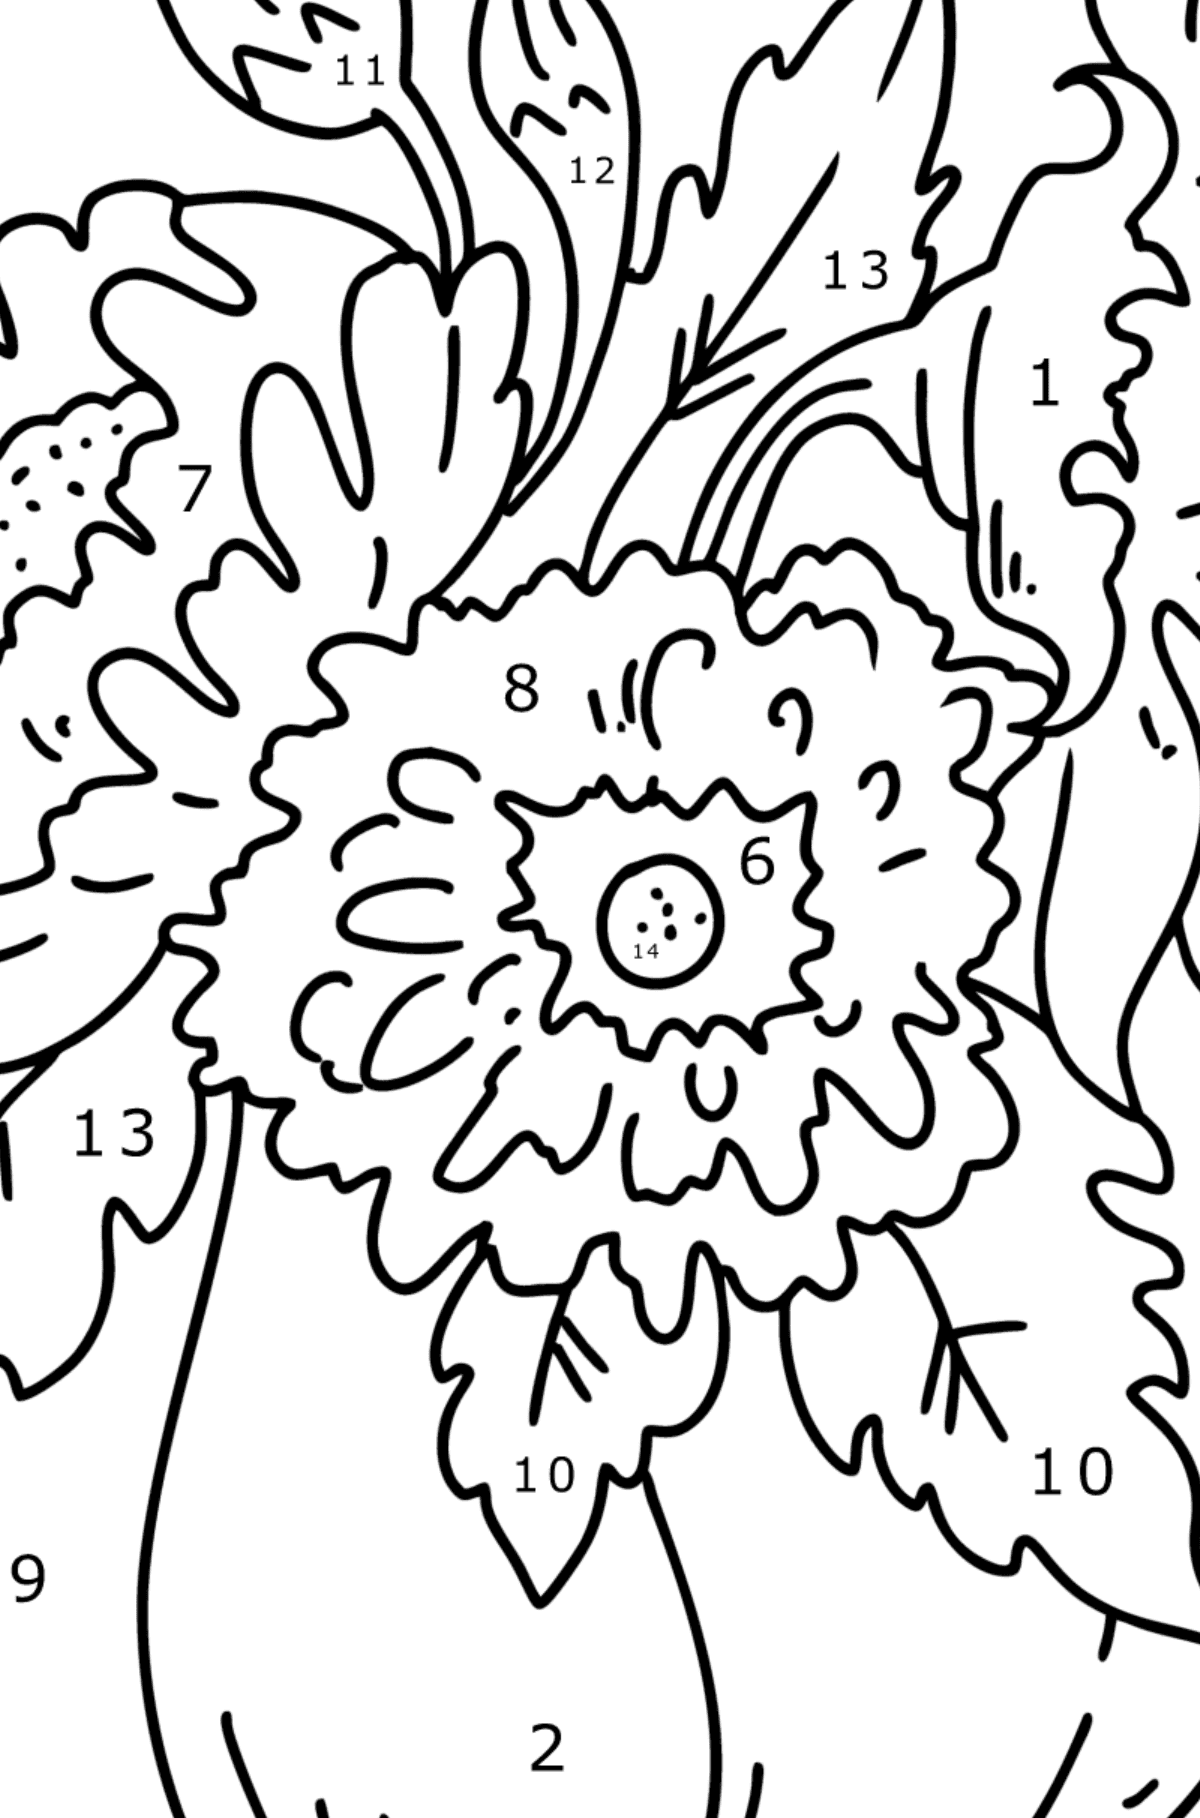 Coloring page Autumn - Pumpkin and Asters - Coloring by Numbers for Kids